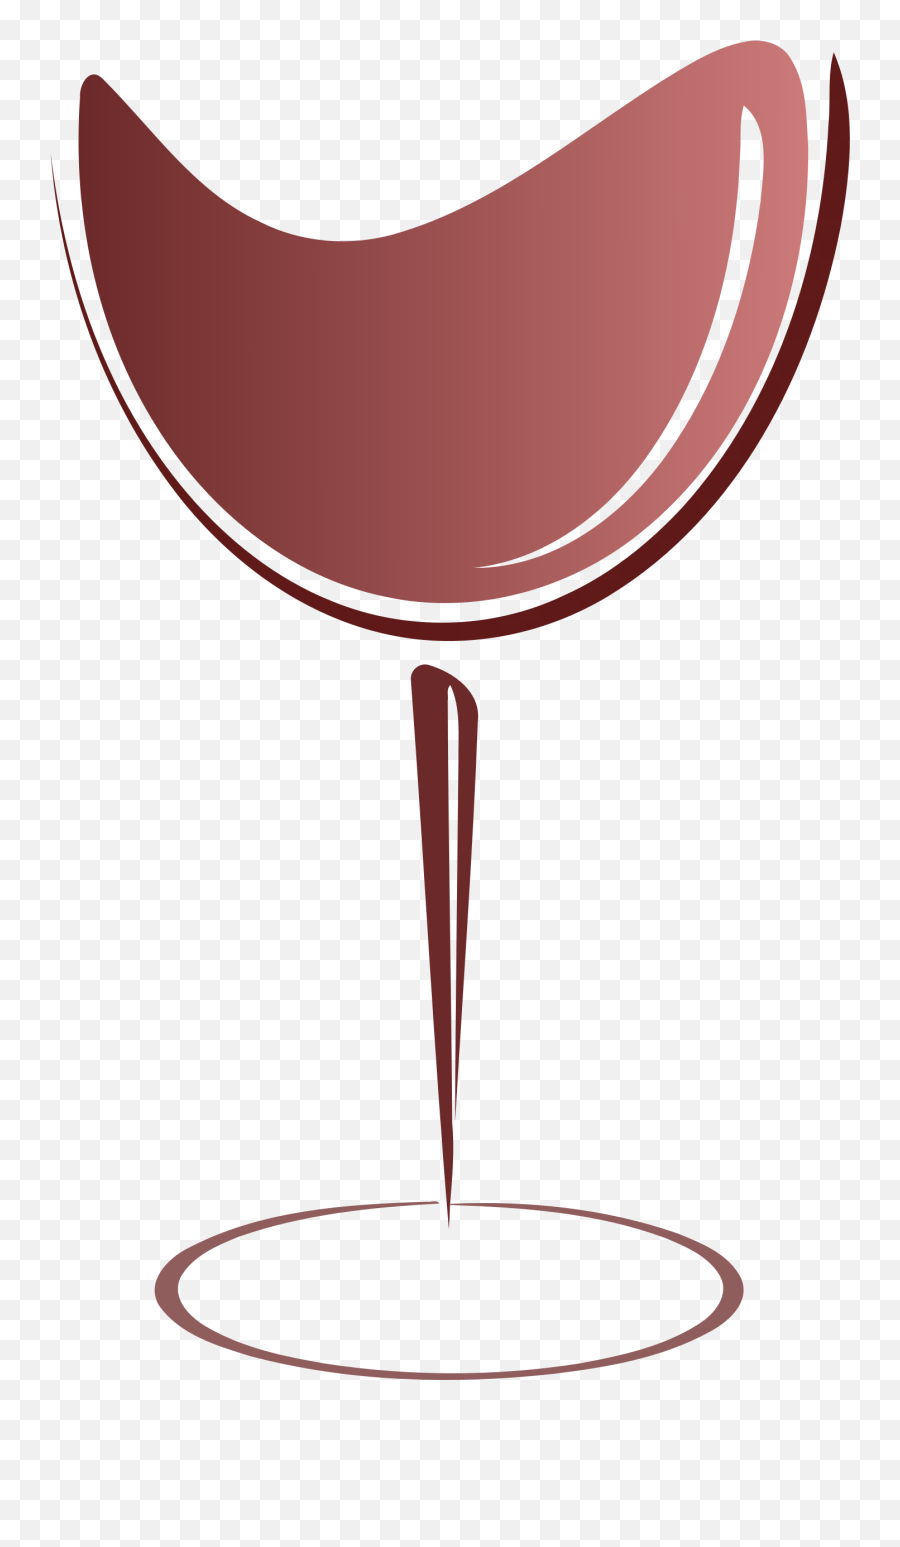 Big Image - Abstract Wine Glass Clipart Full Size Clipart Wine Glass Emoji,Wine Glass Clipart